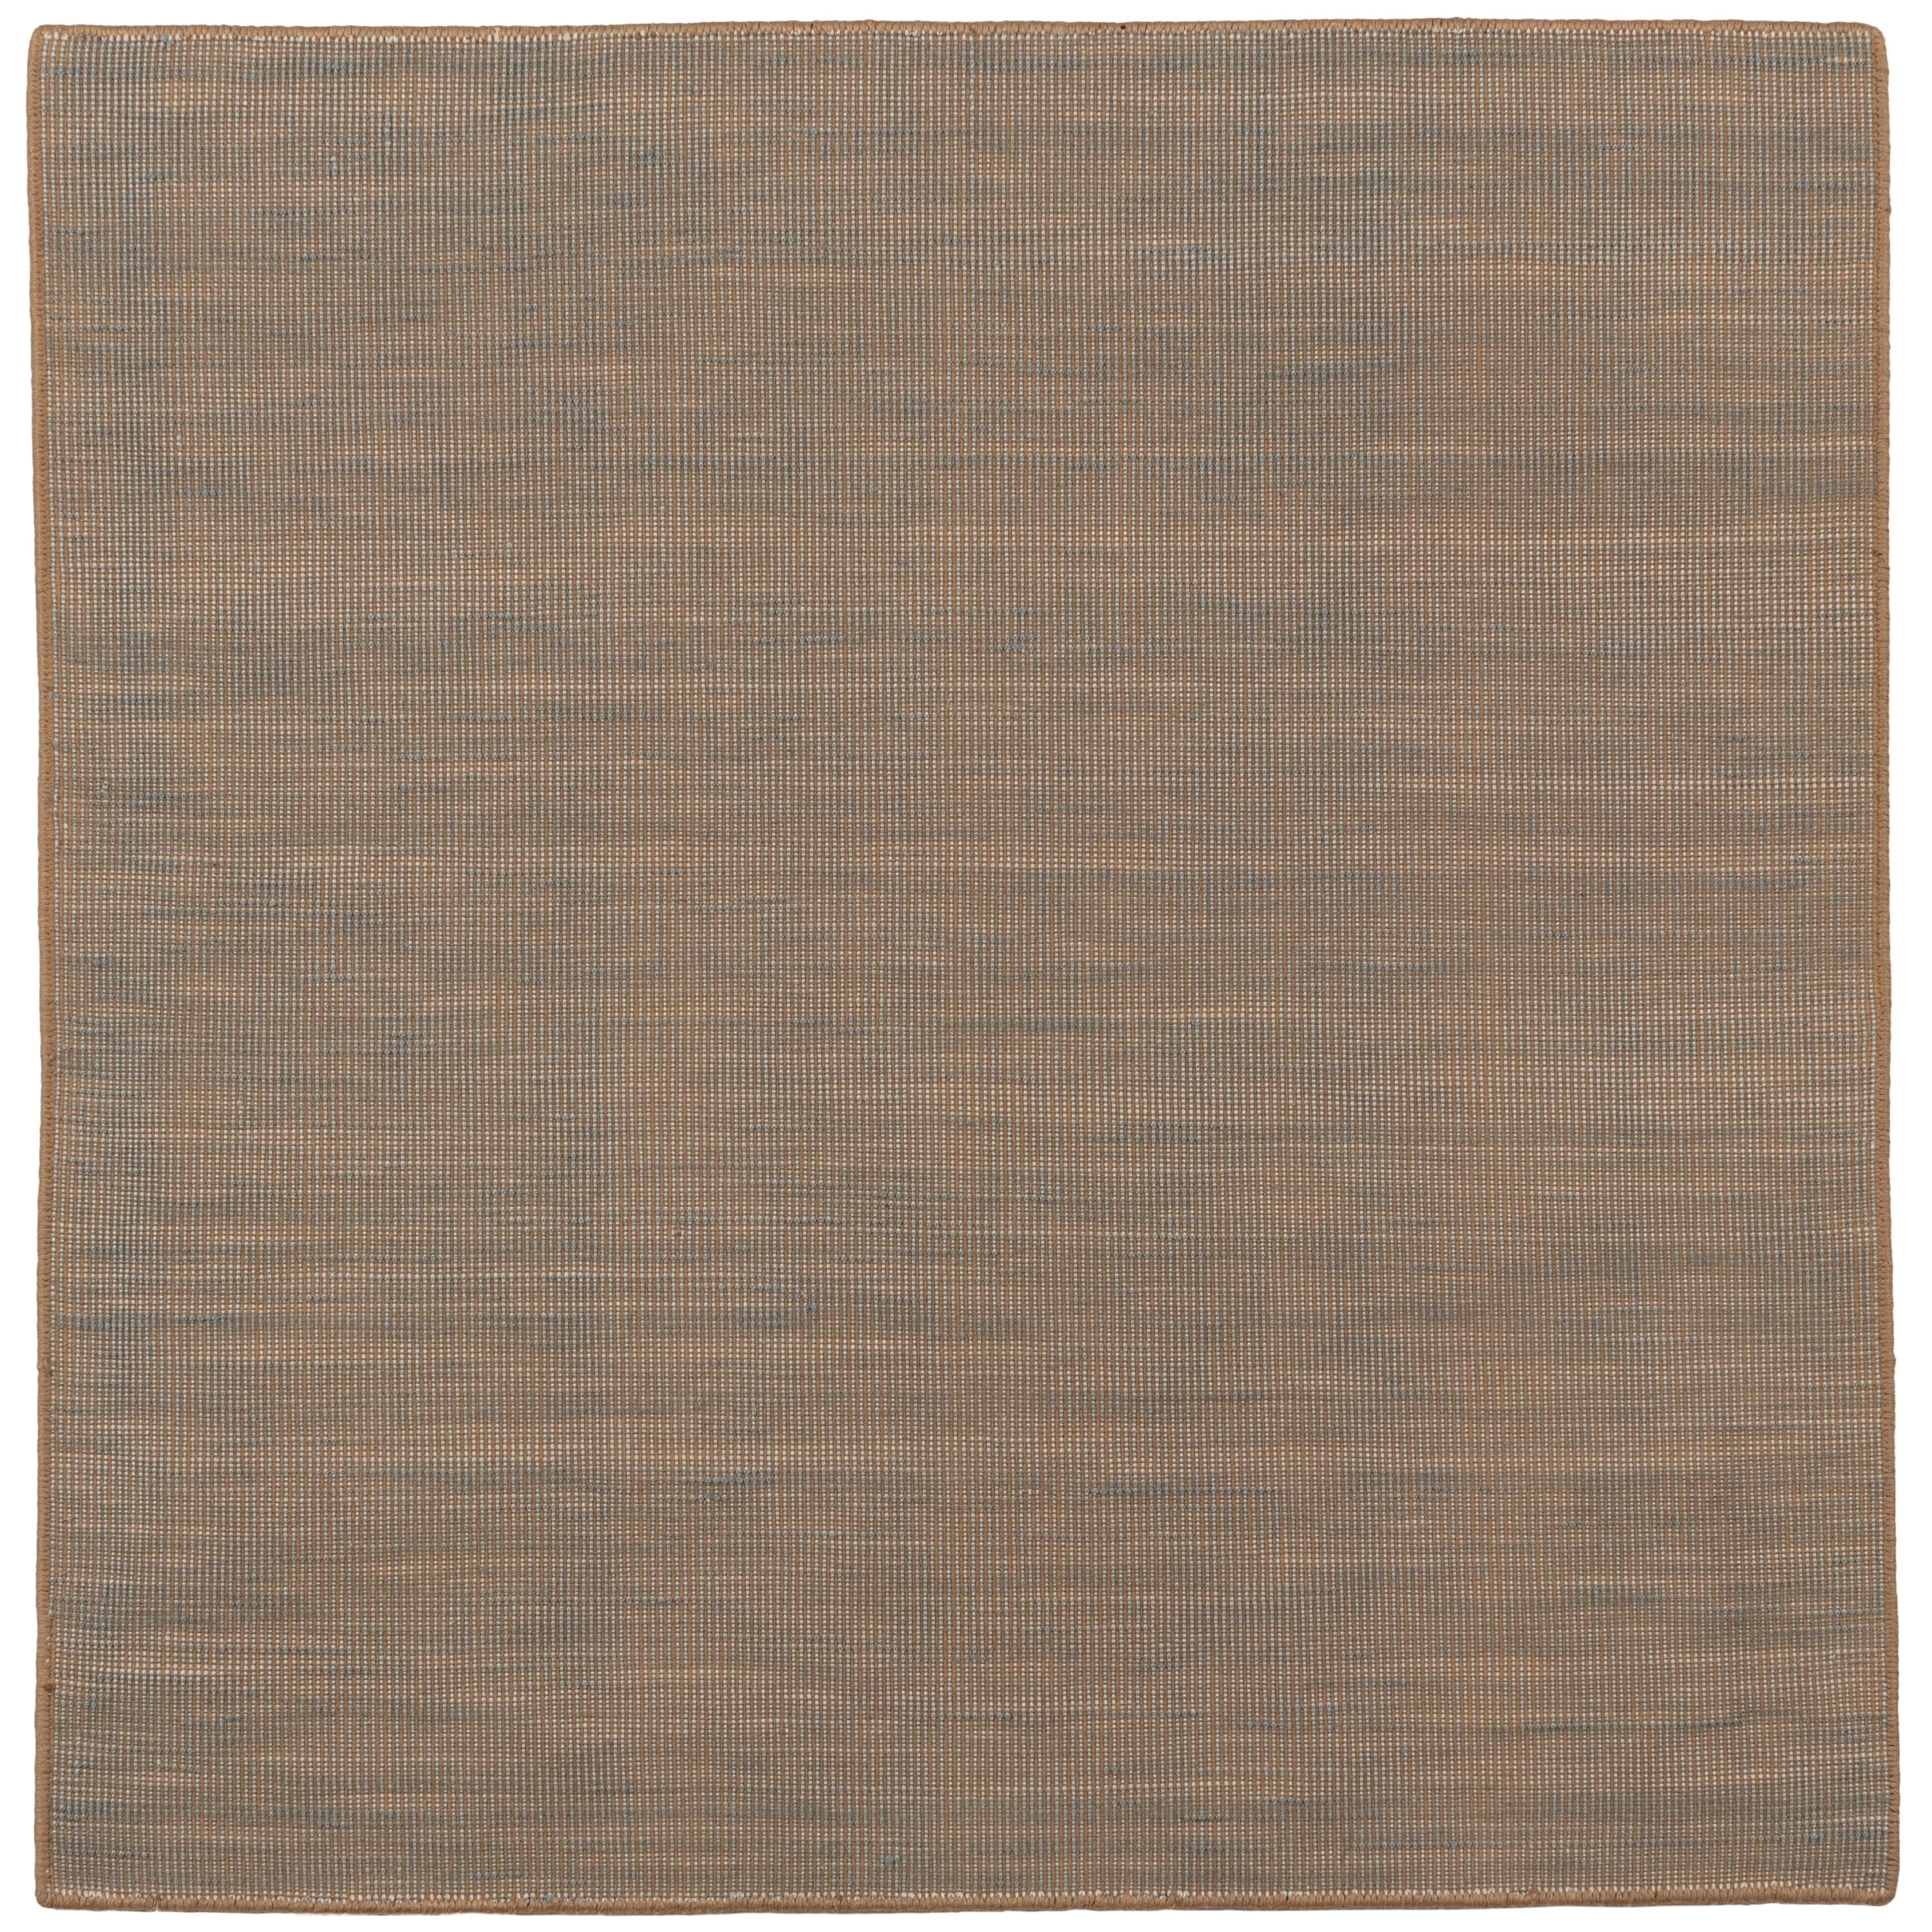 Sample of the Moire Rug in Sand-Pebble, a subtle striated pattern in warm taupe. 